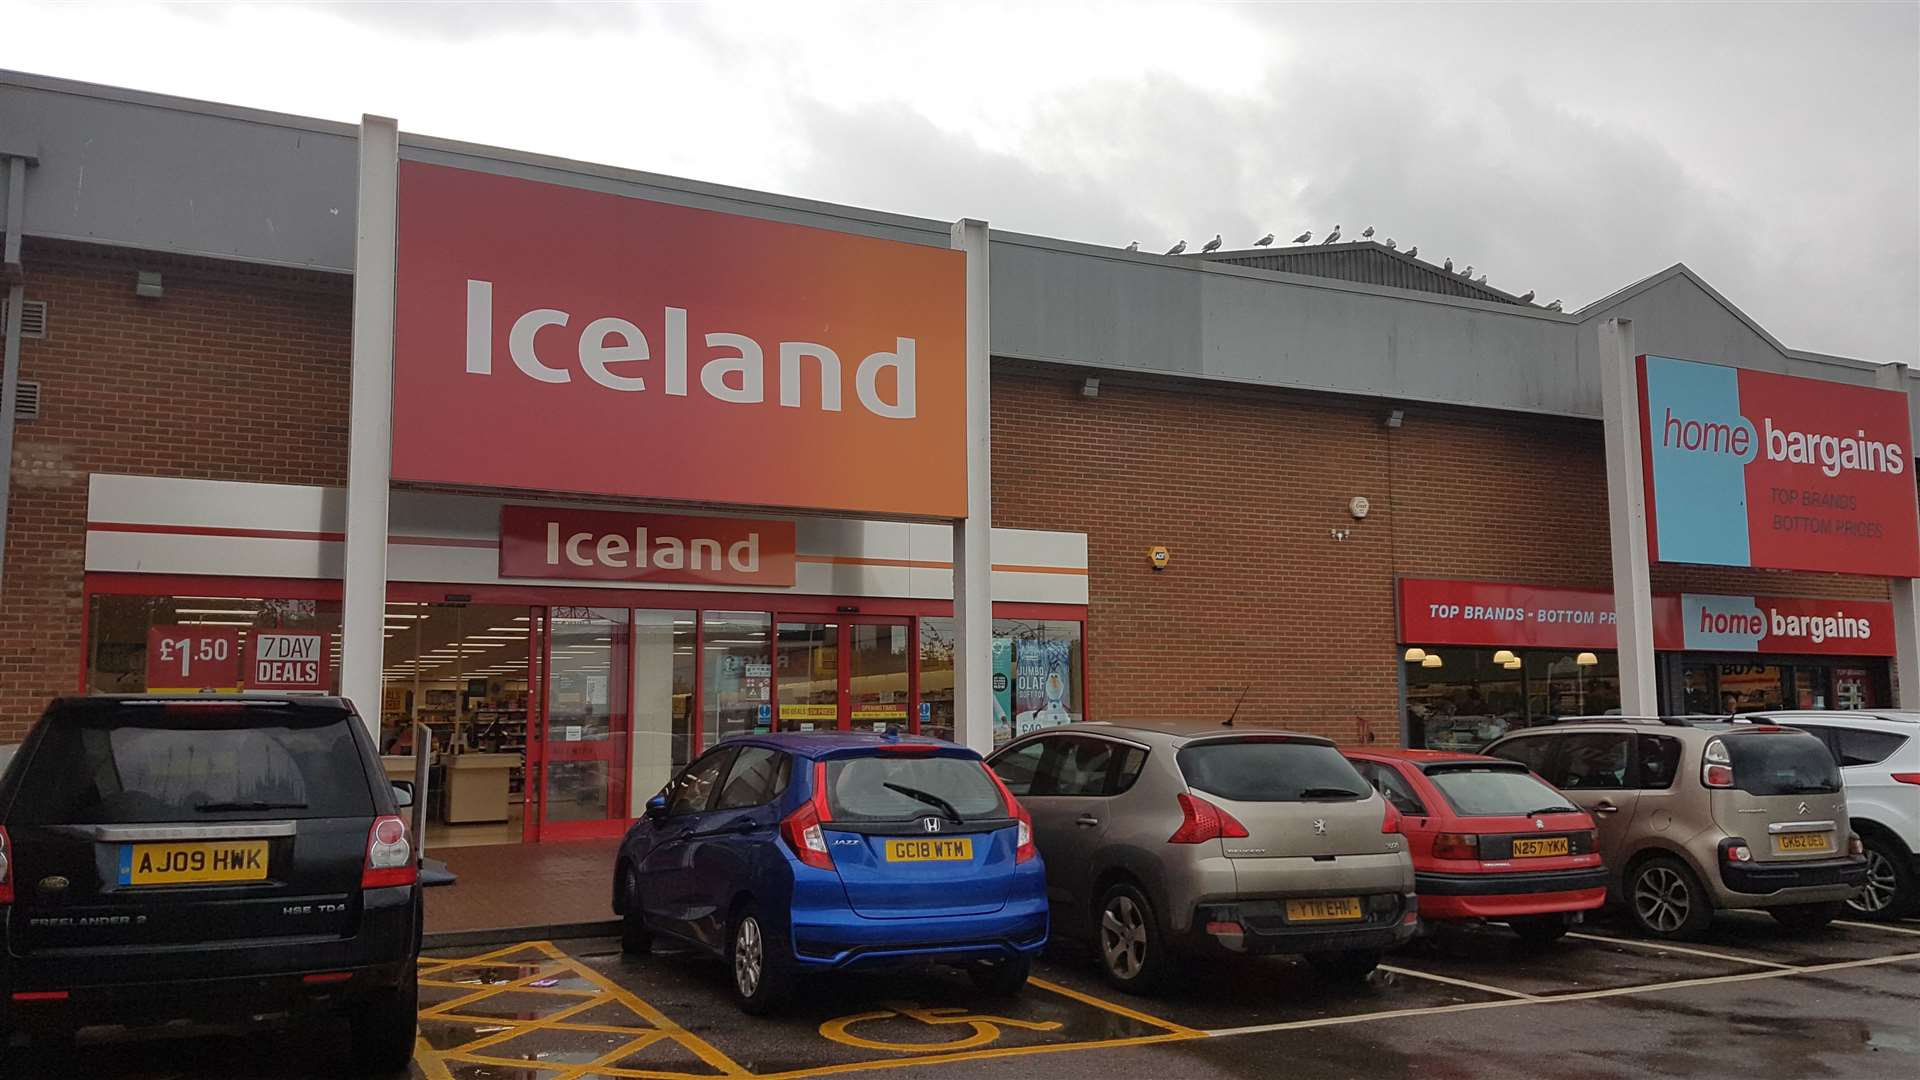 There is an existing Iceland just a two-minute walk from The Range